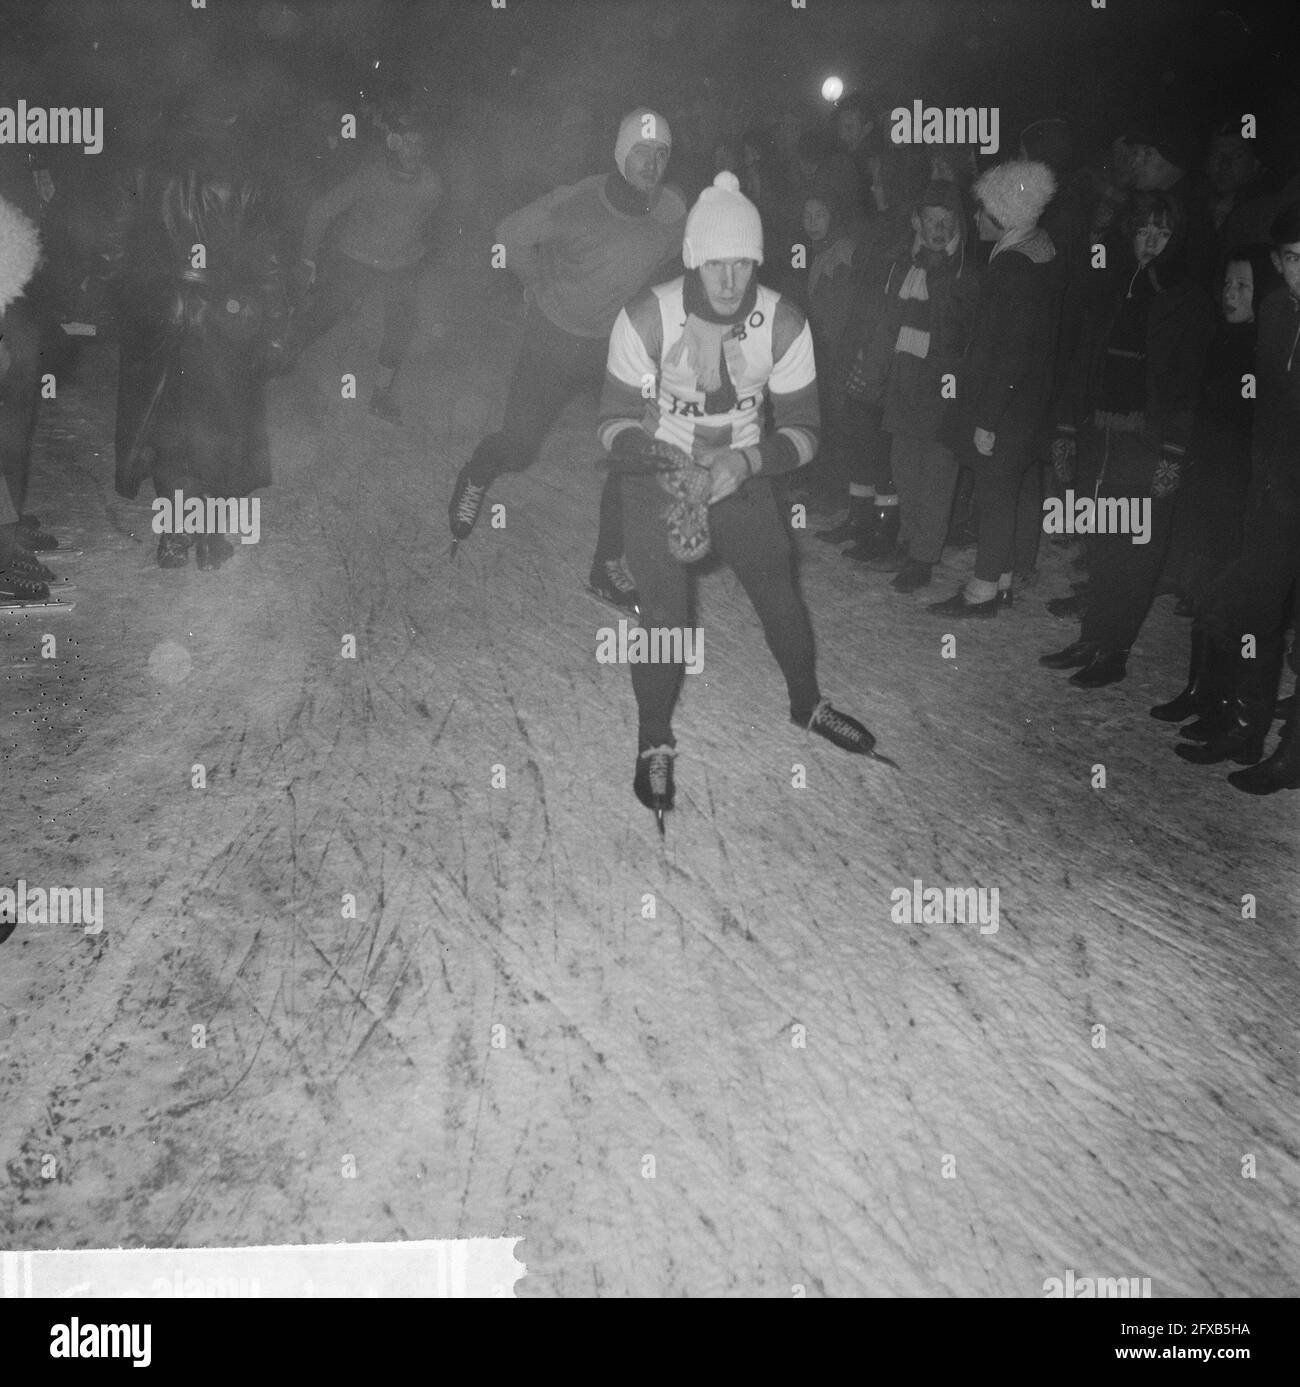 Elfstedentocht 1963. On the ice after the start, 18 January 1963, skating, sport, The Netherlands, 20th century press agency photo, news to remember, documentary, historic photography 1945-1990, visual stories, human history of the Twentieth Century, capturing moments in time Stock Photo